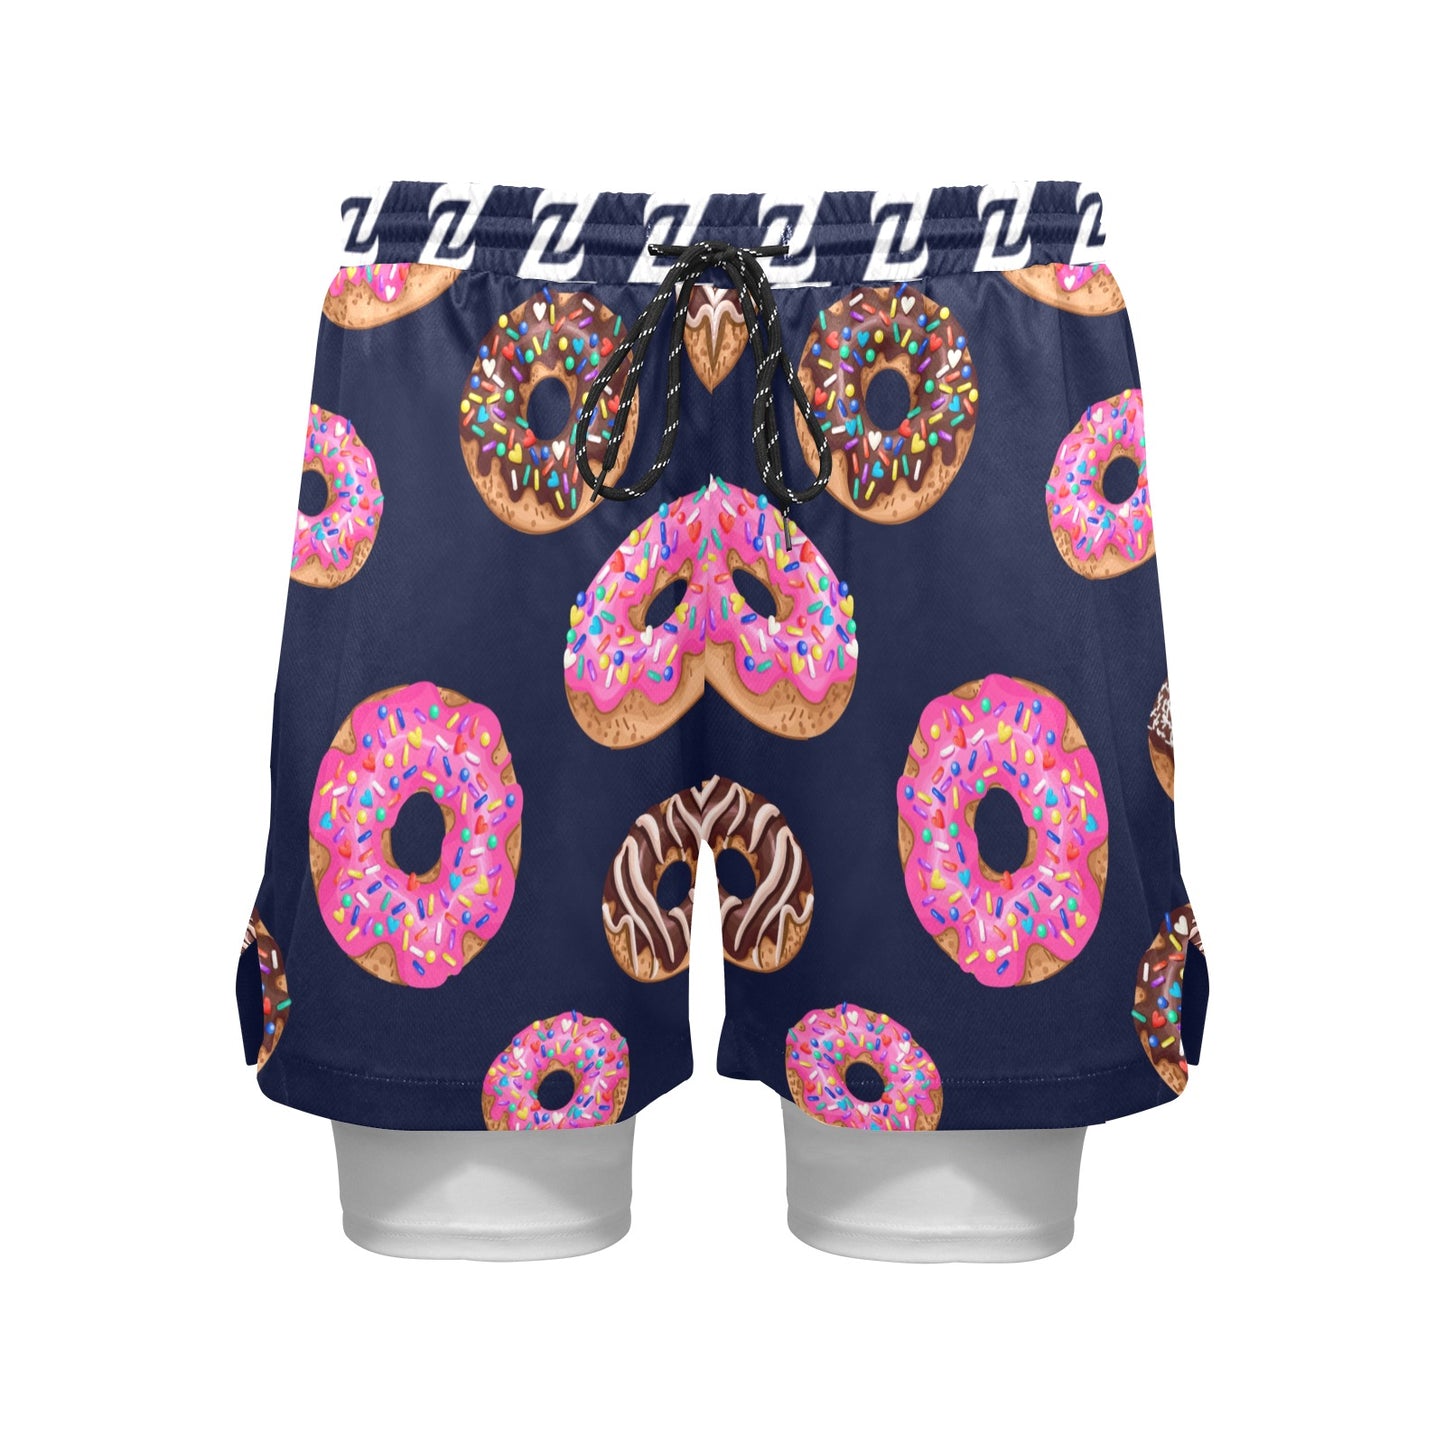 Zen Shorts with Liner - Donuts